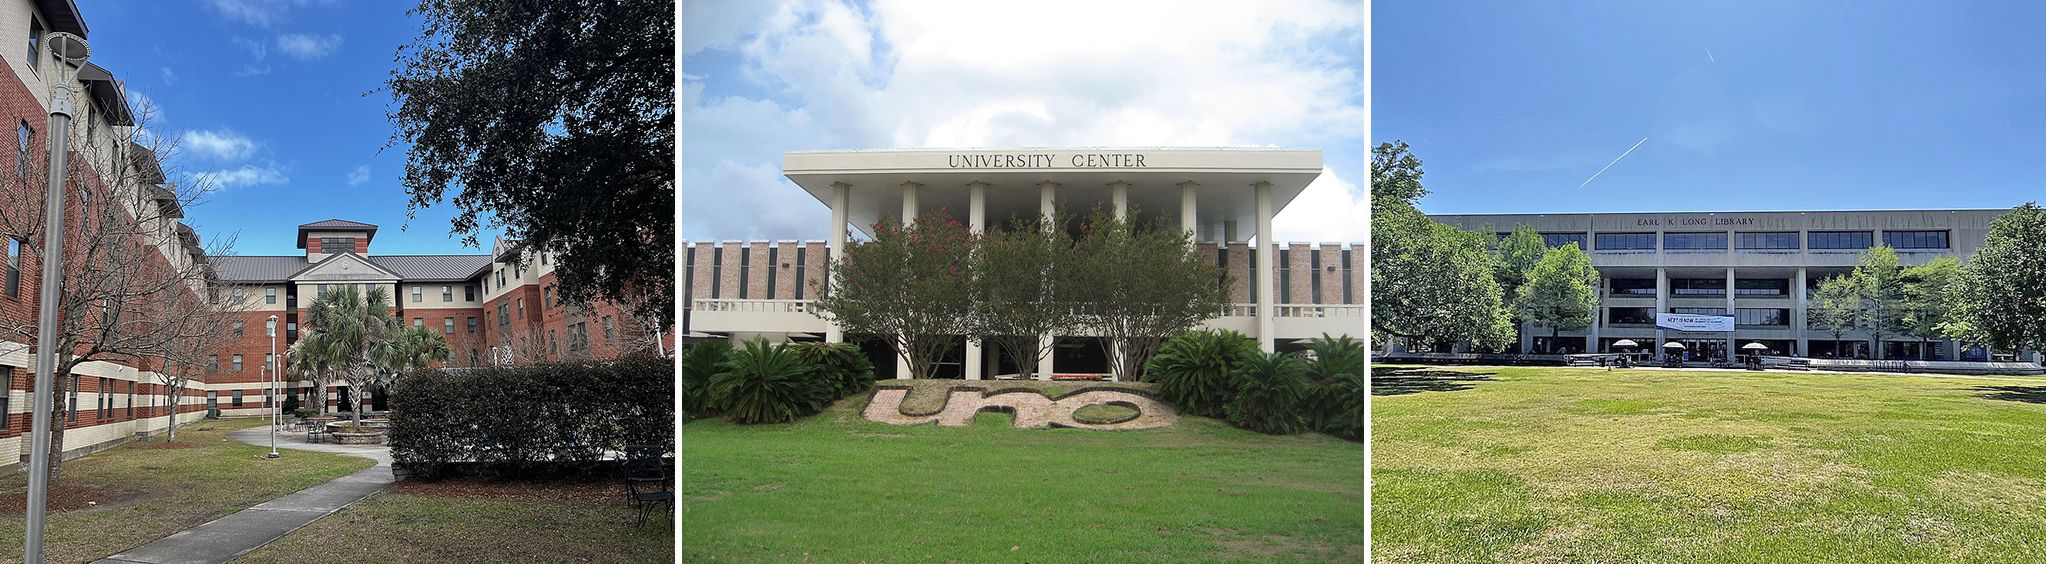 University of New Orleans in New Orleans